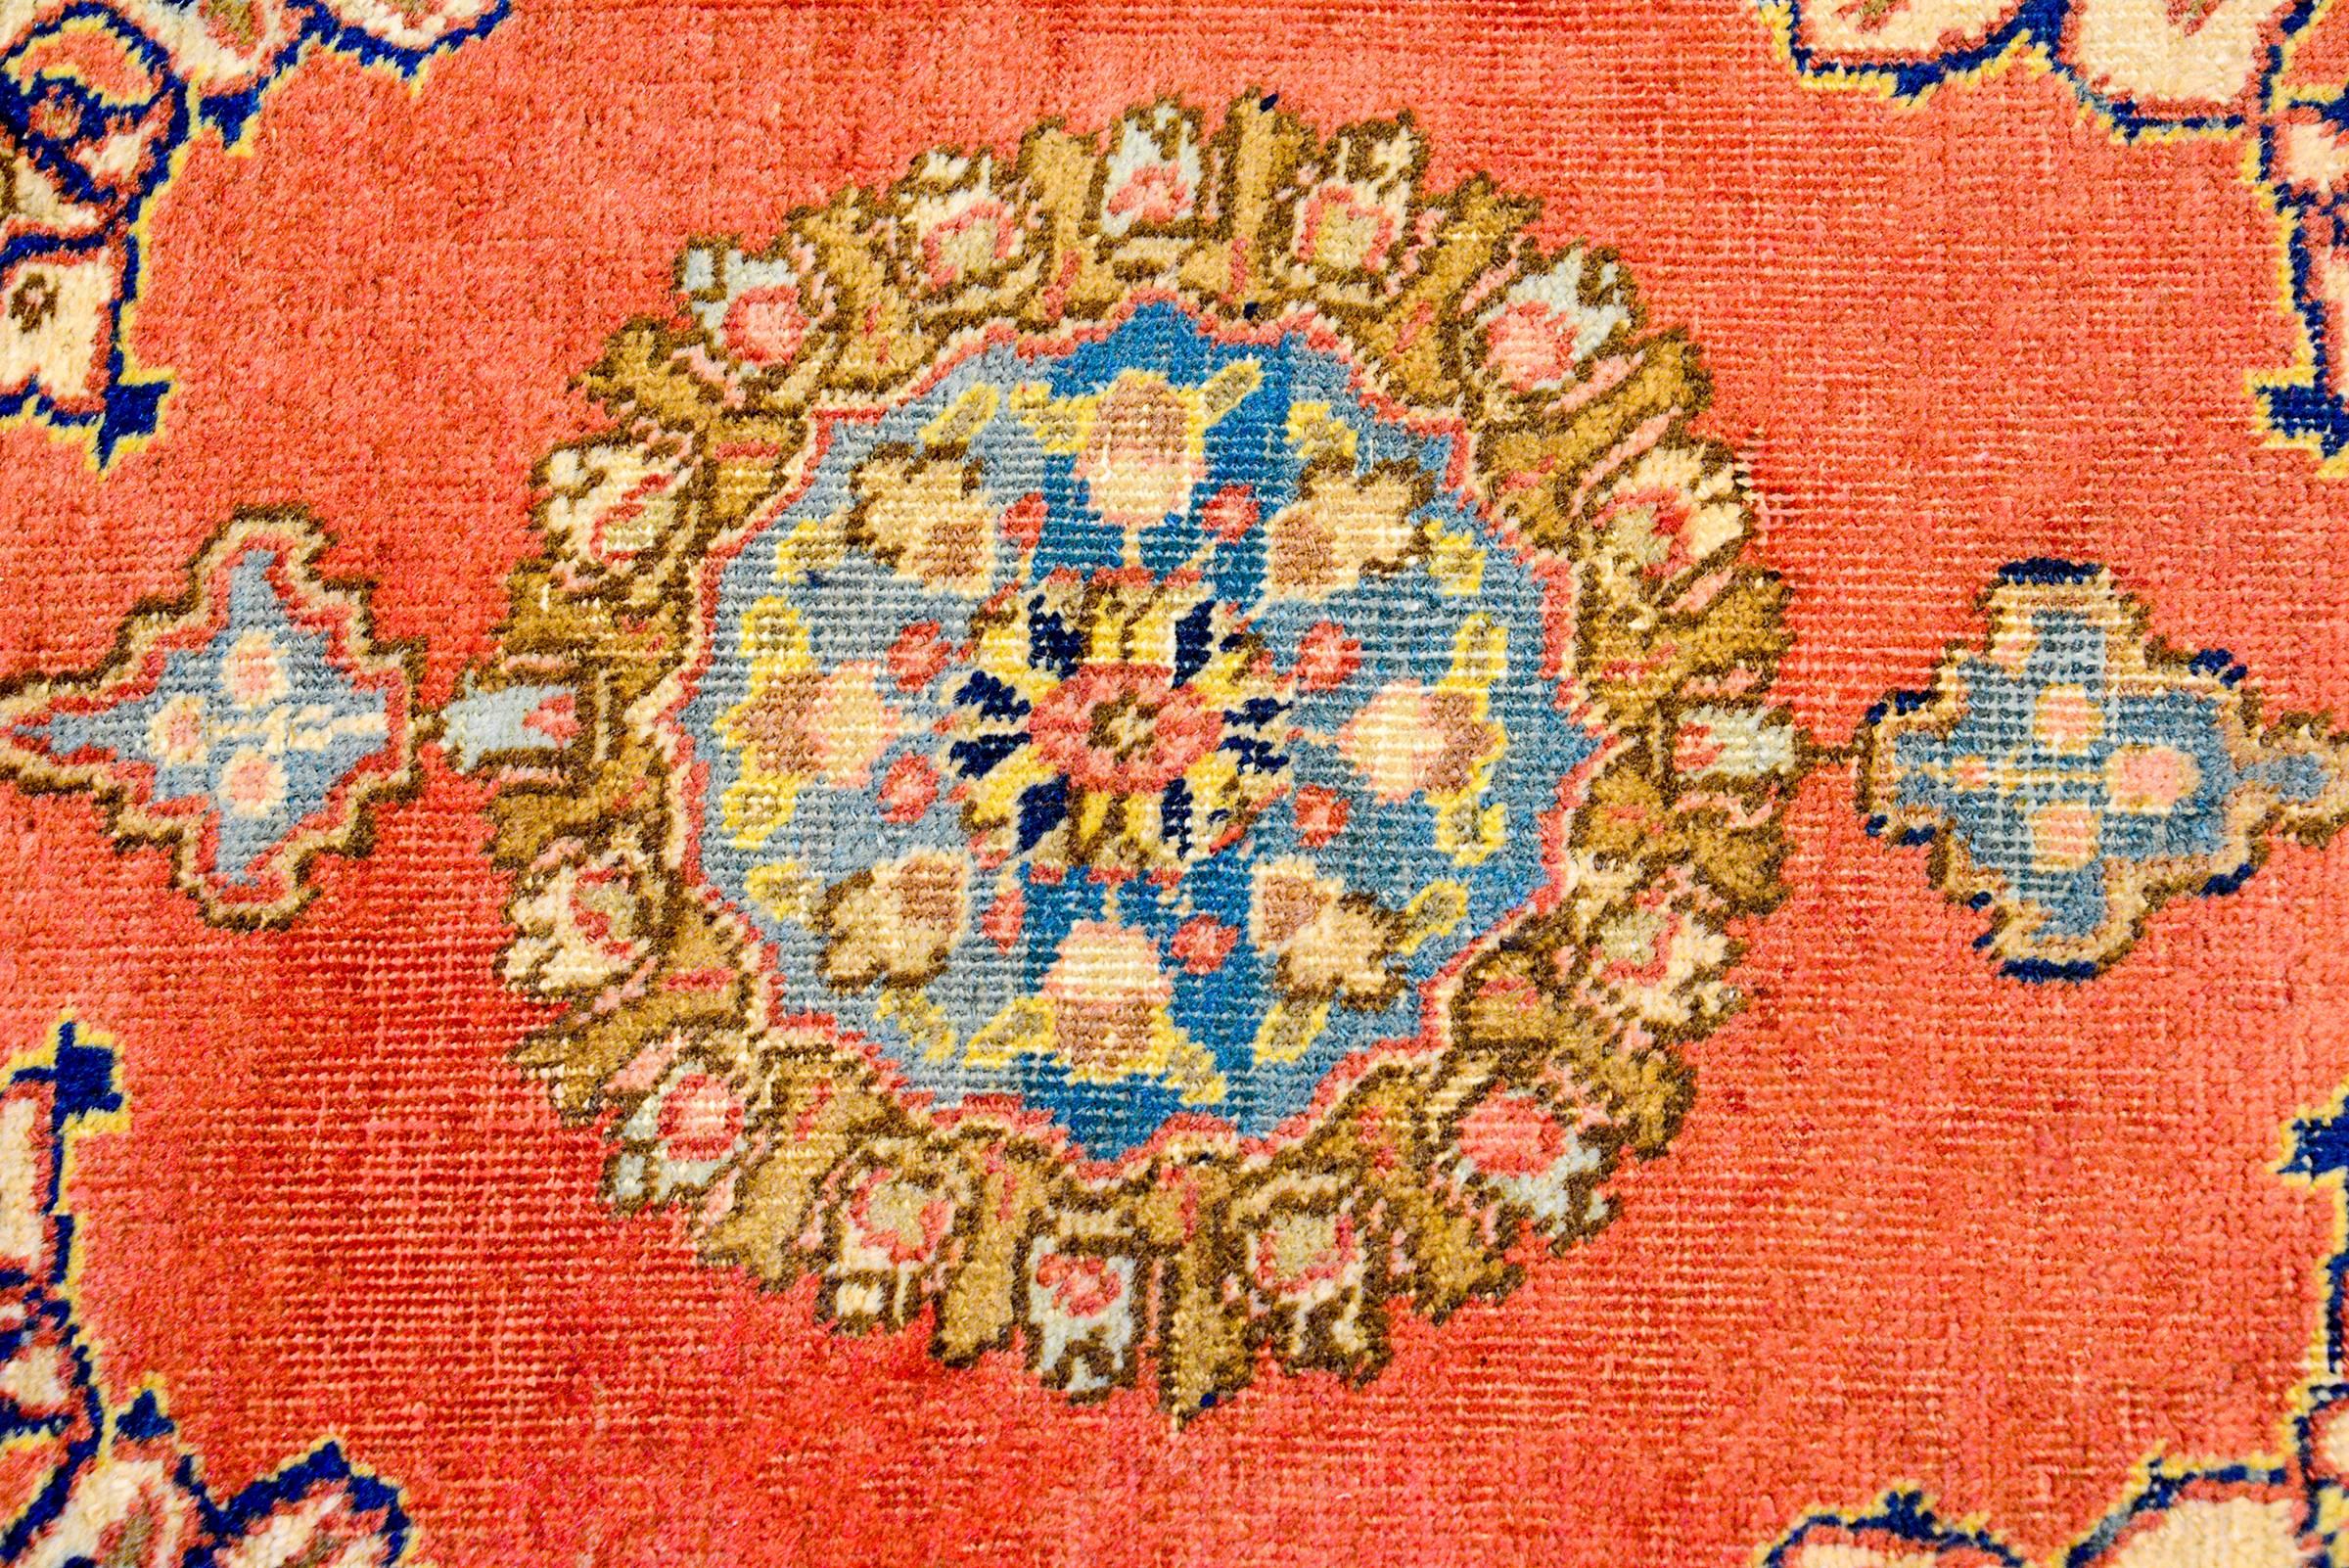 A wonderful early 20th century Persian Tabriz rug with a beautiful central floral medallion woven in indigo and gold, on a coral background. The border is sweet, with large-scale flowers and leaves.